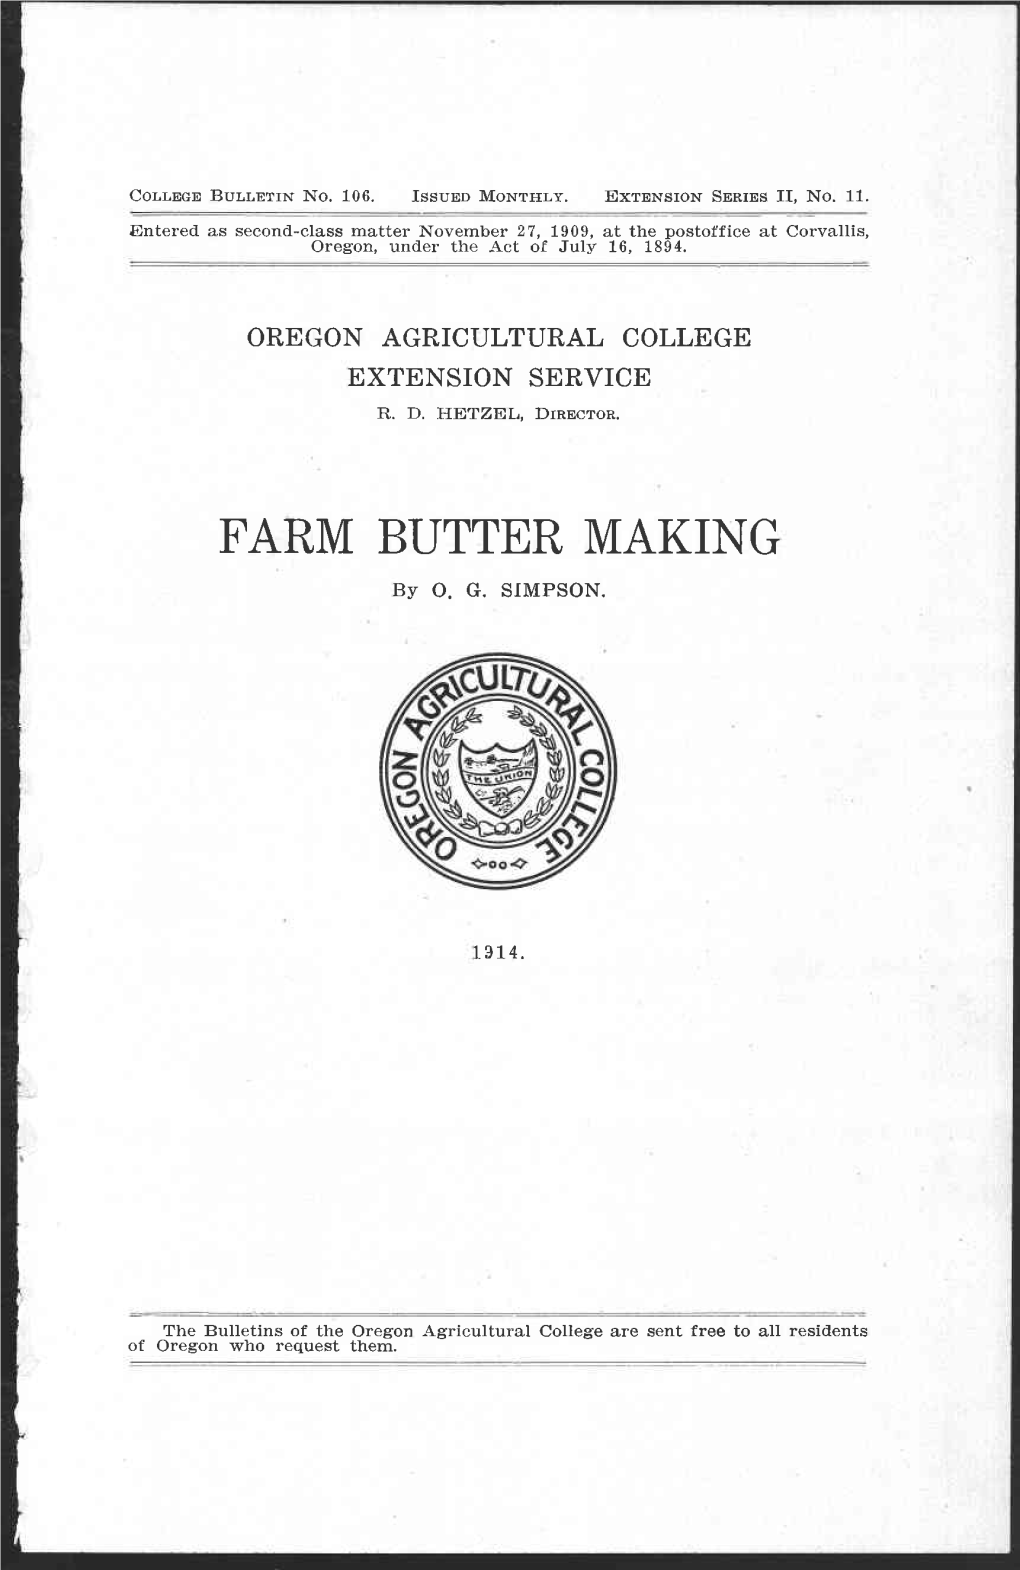 FARM BUTTER MAKING by 0